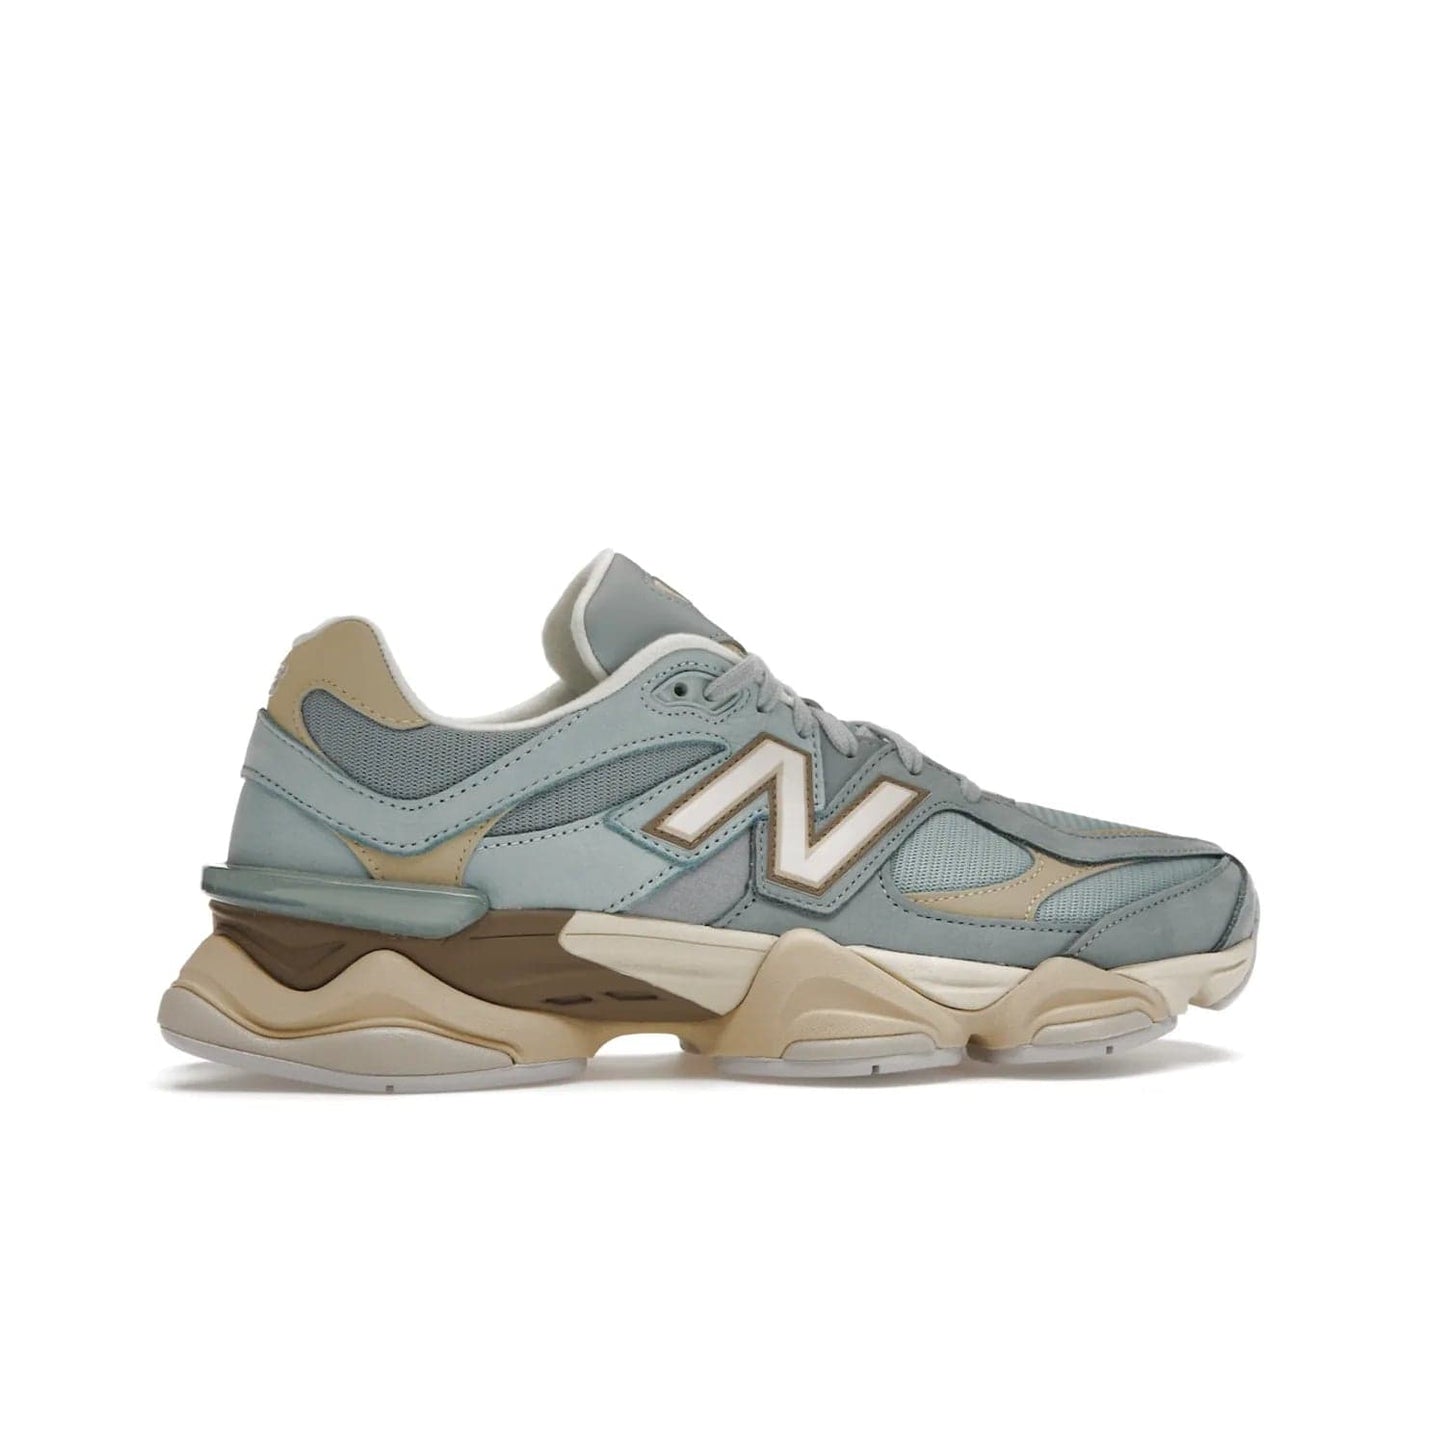 New Balance 9060 Blue Haze - Image 36 - Only at www.BallersClubKickz.com - The New Balance 9060 Blue Haze combines blue haze and beige colors to create a classic silhouette. Breathable upper, EVA and rubber midsole, rubber outsole, and "N" branding complete the design. Released February 3, 2023.